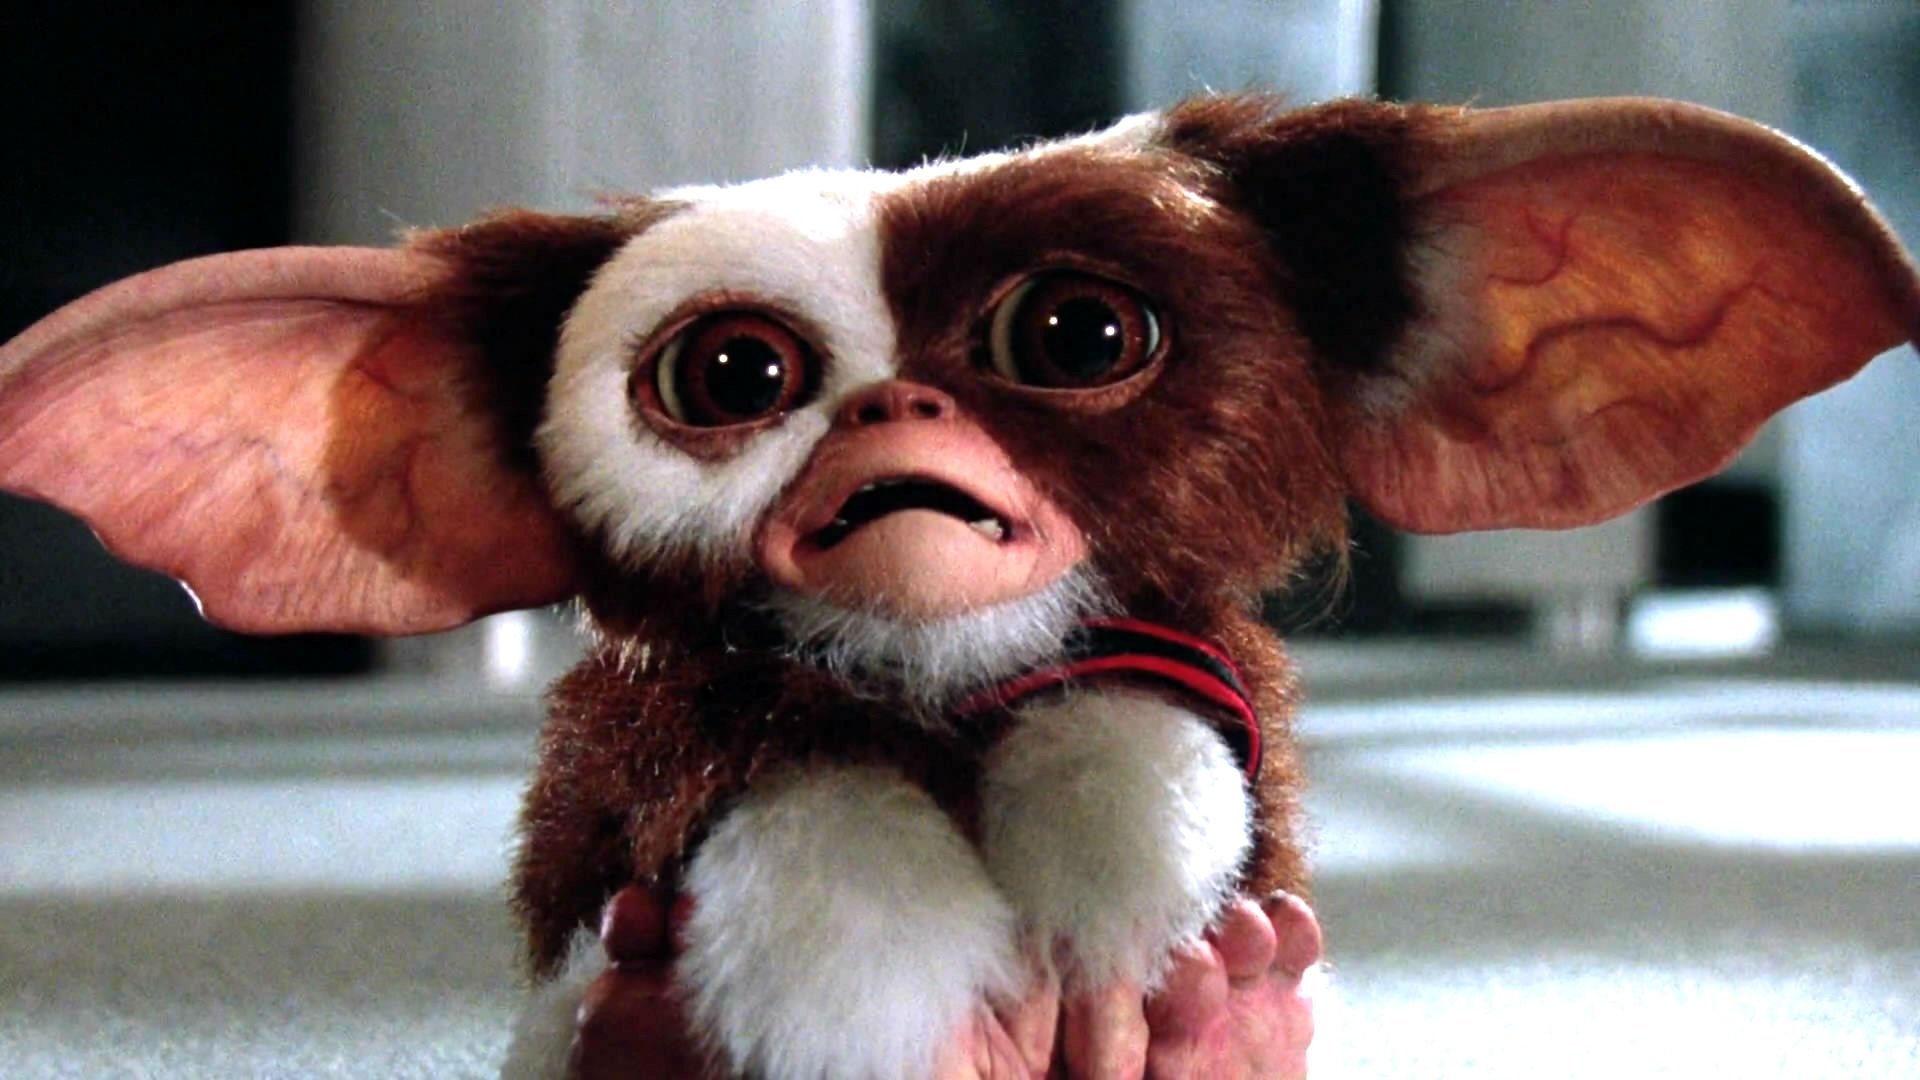 Gremlin: The adventures of Gizmo, who spawns numerous small monsters when wet. 1920x1080 Full HD Background.